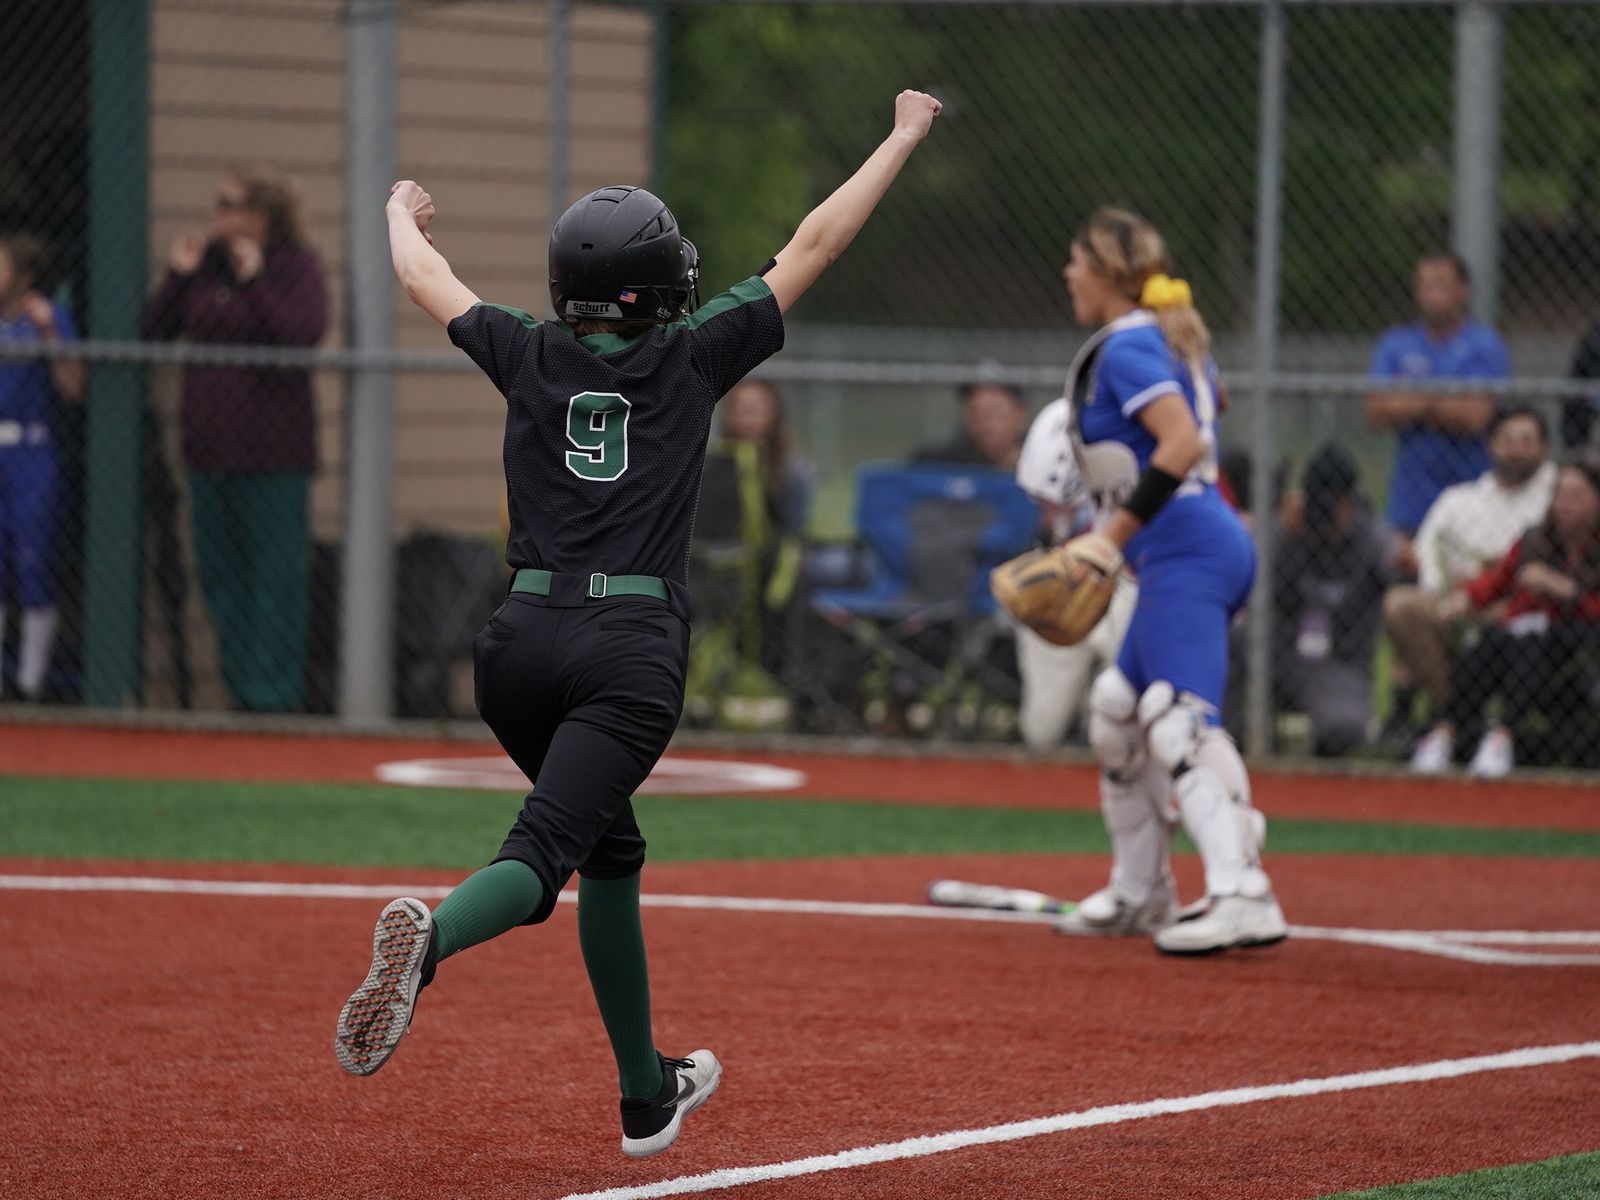 The Tigard and Newberg softball team compete in a Class 6A state quarterfinal game on Friday, May 27, 2022 at Tigard High School.